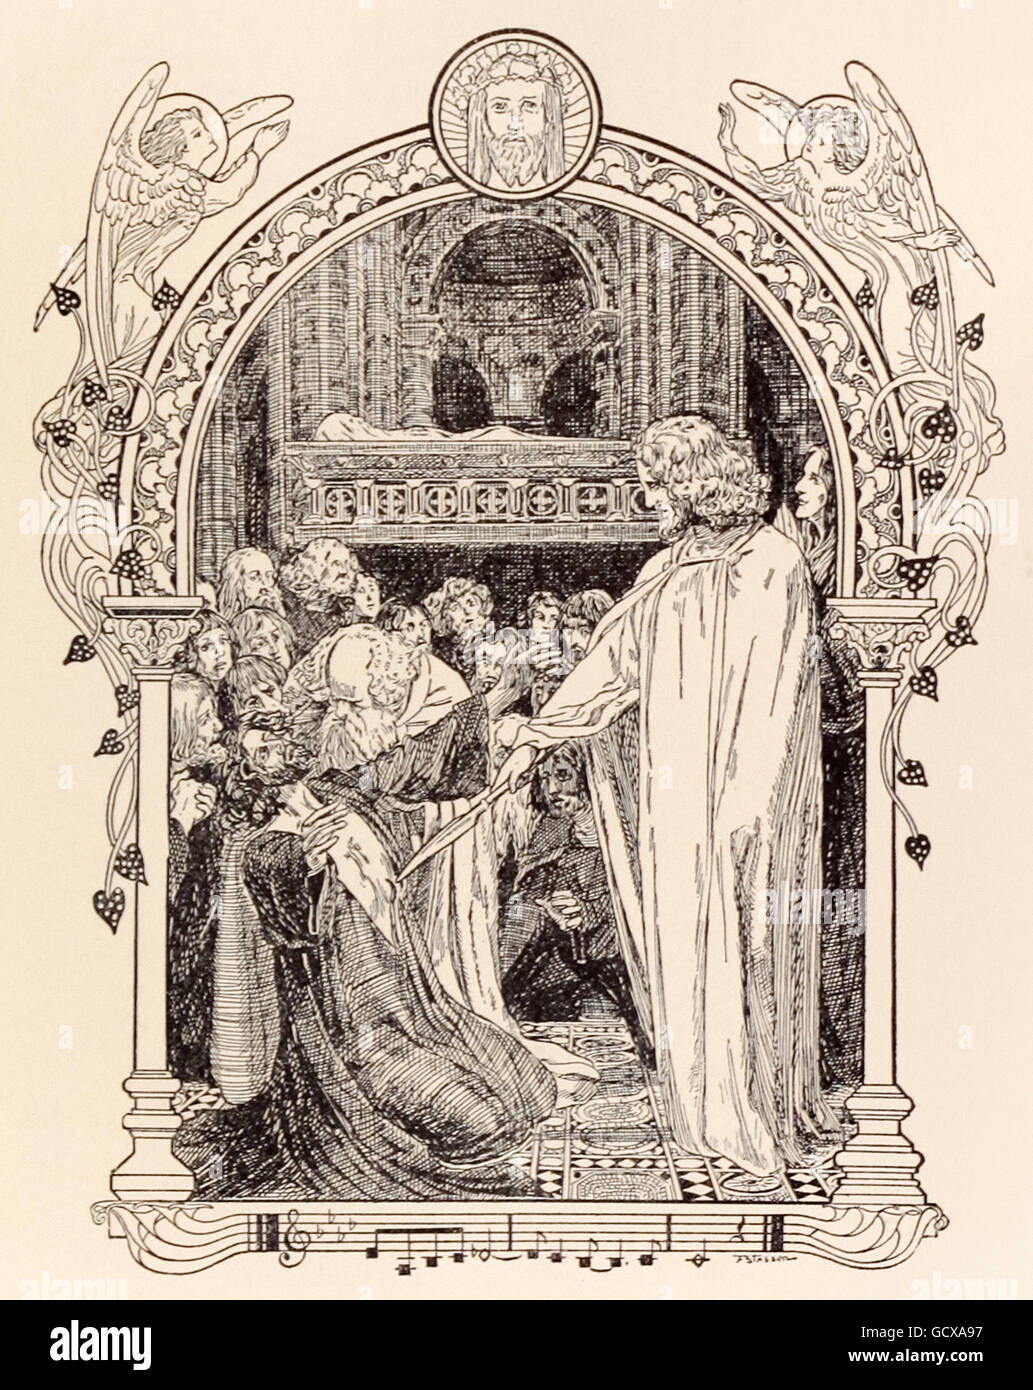 “Parsifal healing King Amfortas.” Franz Stassen (1869-1949) illustration for “Parsifal” by Richard Wagner (1813-1883). Act 3, in the castle of the Grail, Amfortas is brought before the Grail shrine and healed. See description for more information. Stock Photo